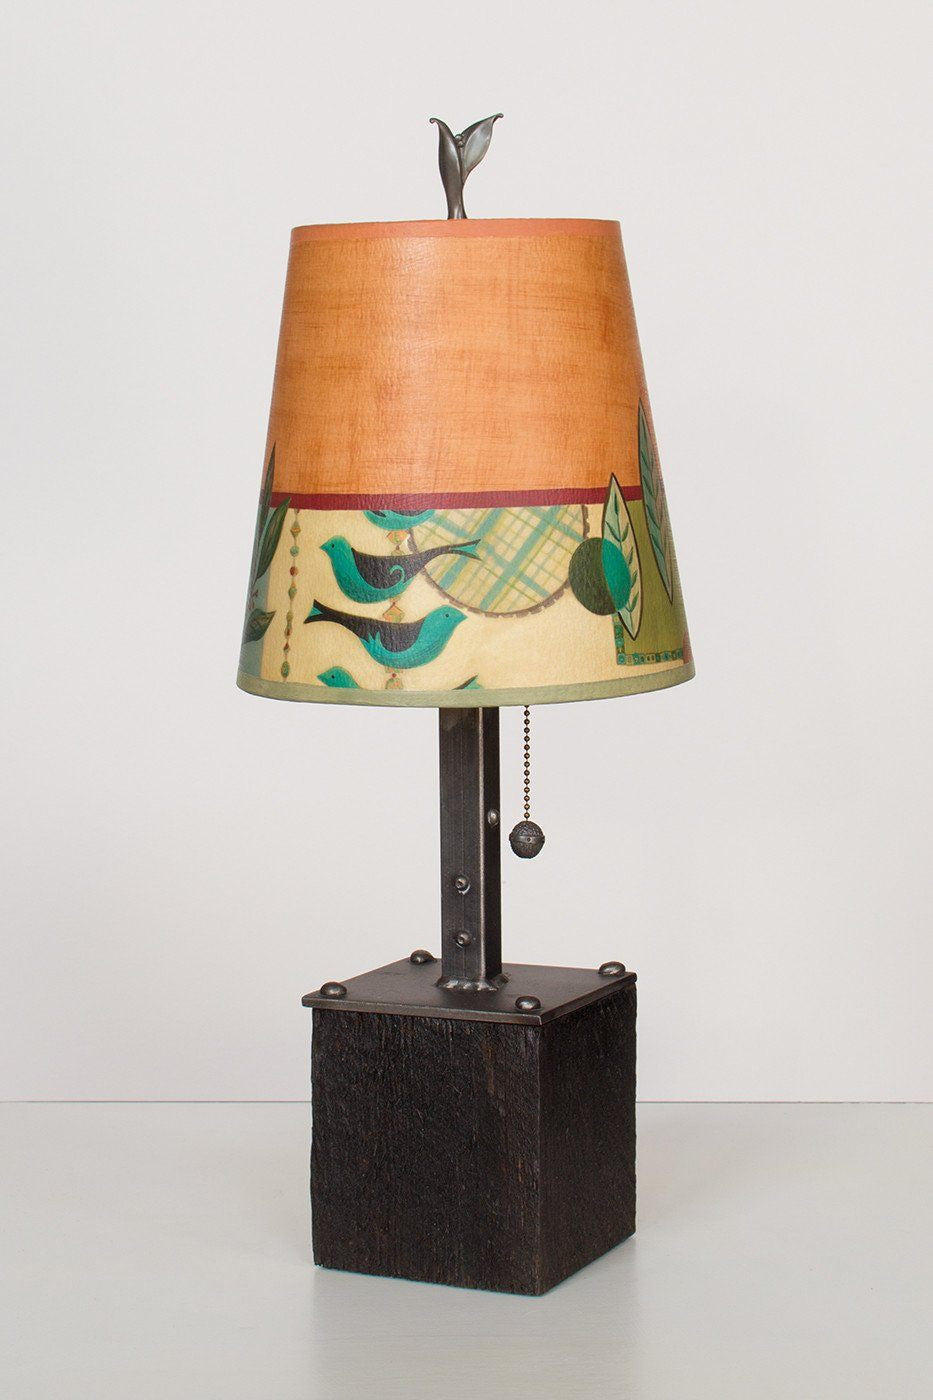 Steel Table Lamp on Reclaimed Wood with Small Drum Shade in New Capri Spice Lit